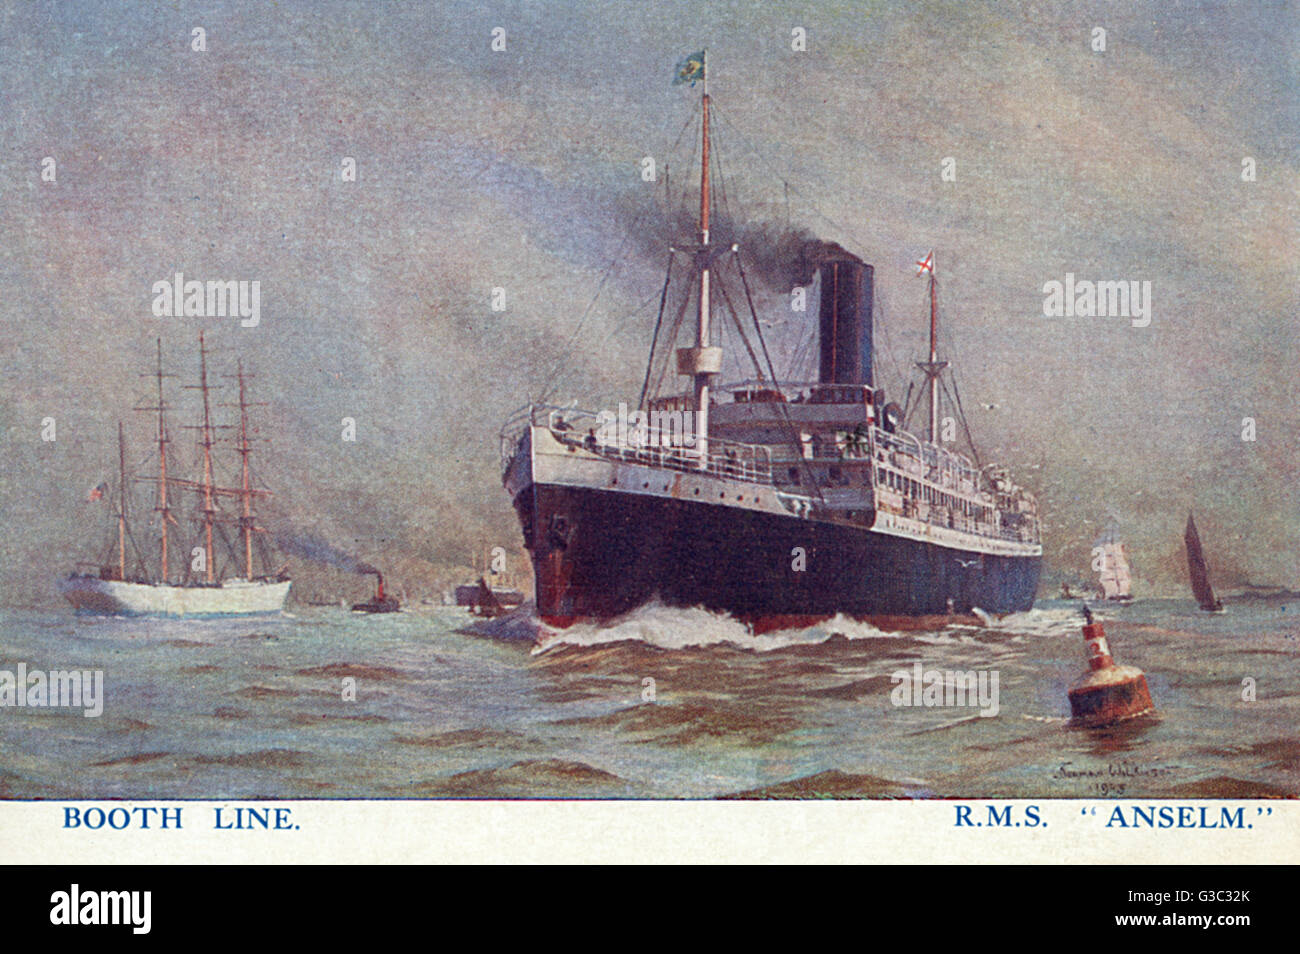 SS Anselm, a British turbine steamship of the Booth Steamship Company. Flying both the English and Brazilian flags - hinting at the standard route of passage for this particular vessel. Converted to a troop ship in 1940 and sunk by a German submarine in 1 Stock Photo